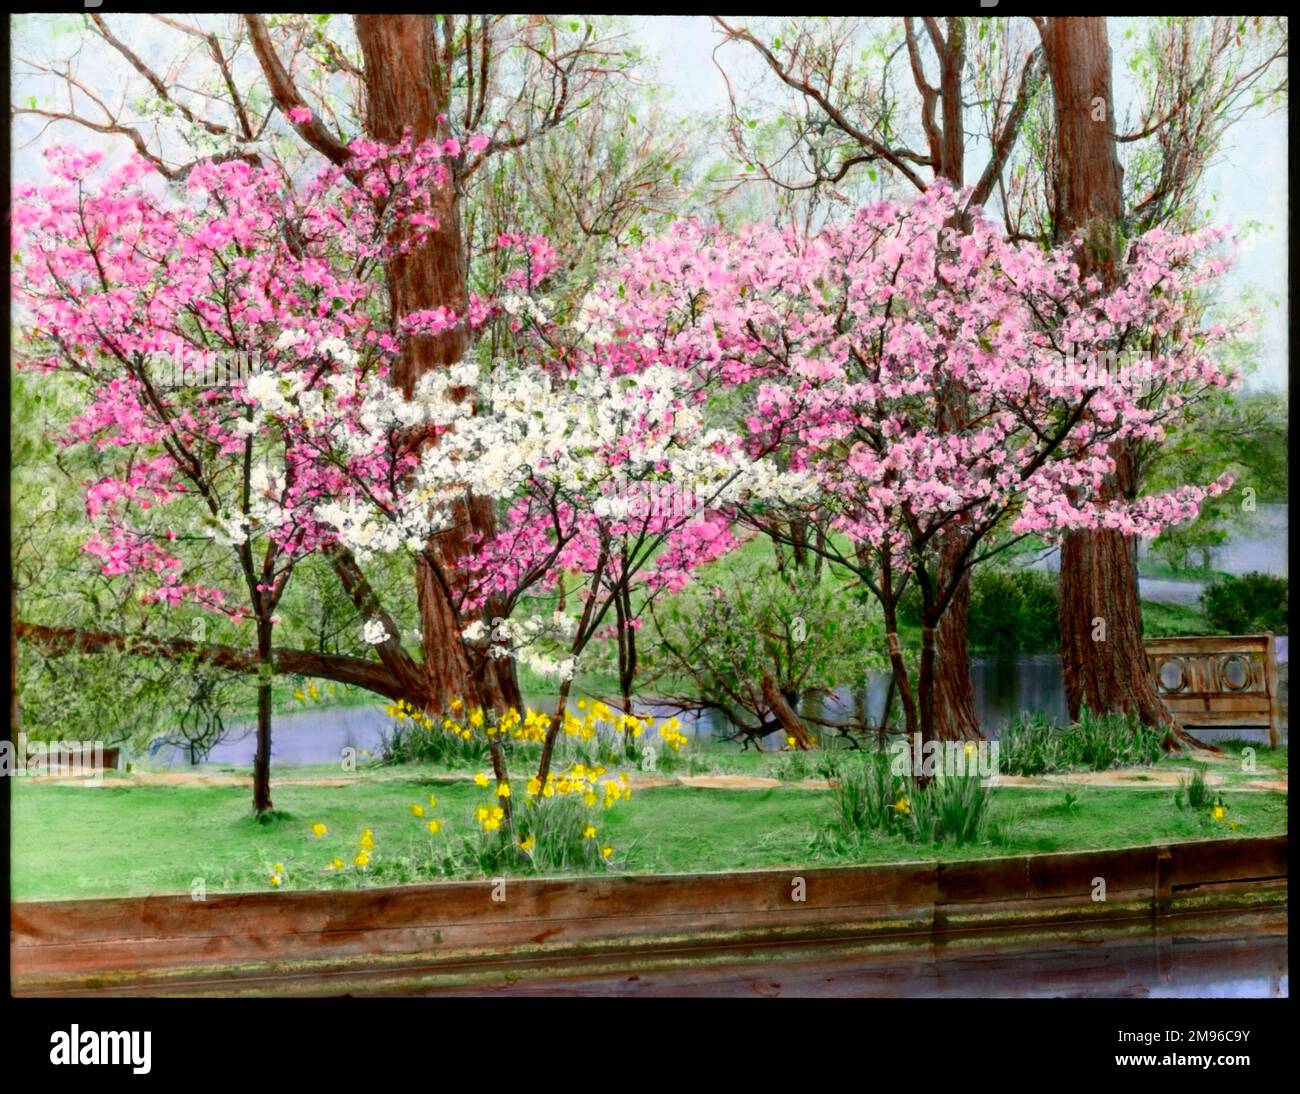 Prunus (Flowering Cherry Tree), several ornamental trees planted near water, laden with pink and white blossom.  Daffodils are growing at their roots. Stock Photo